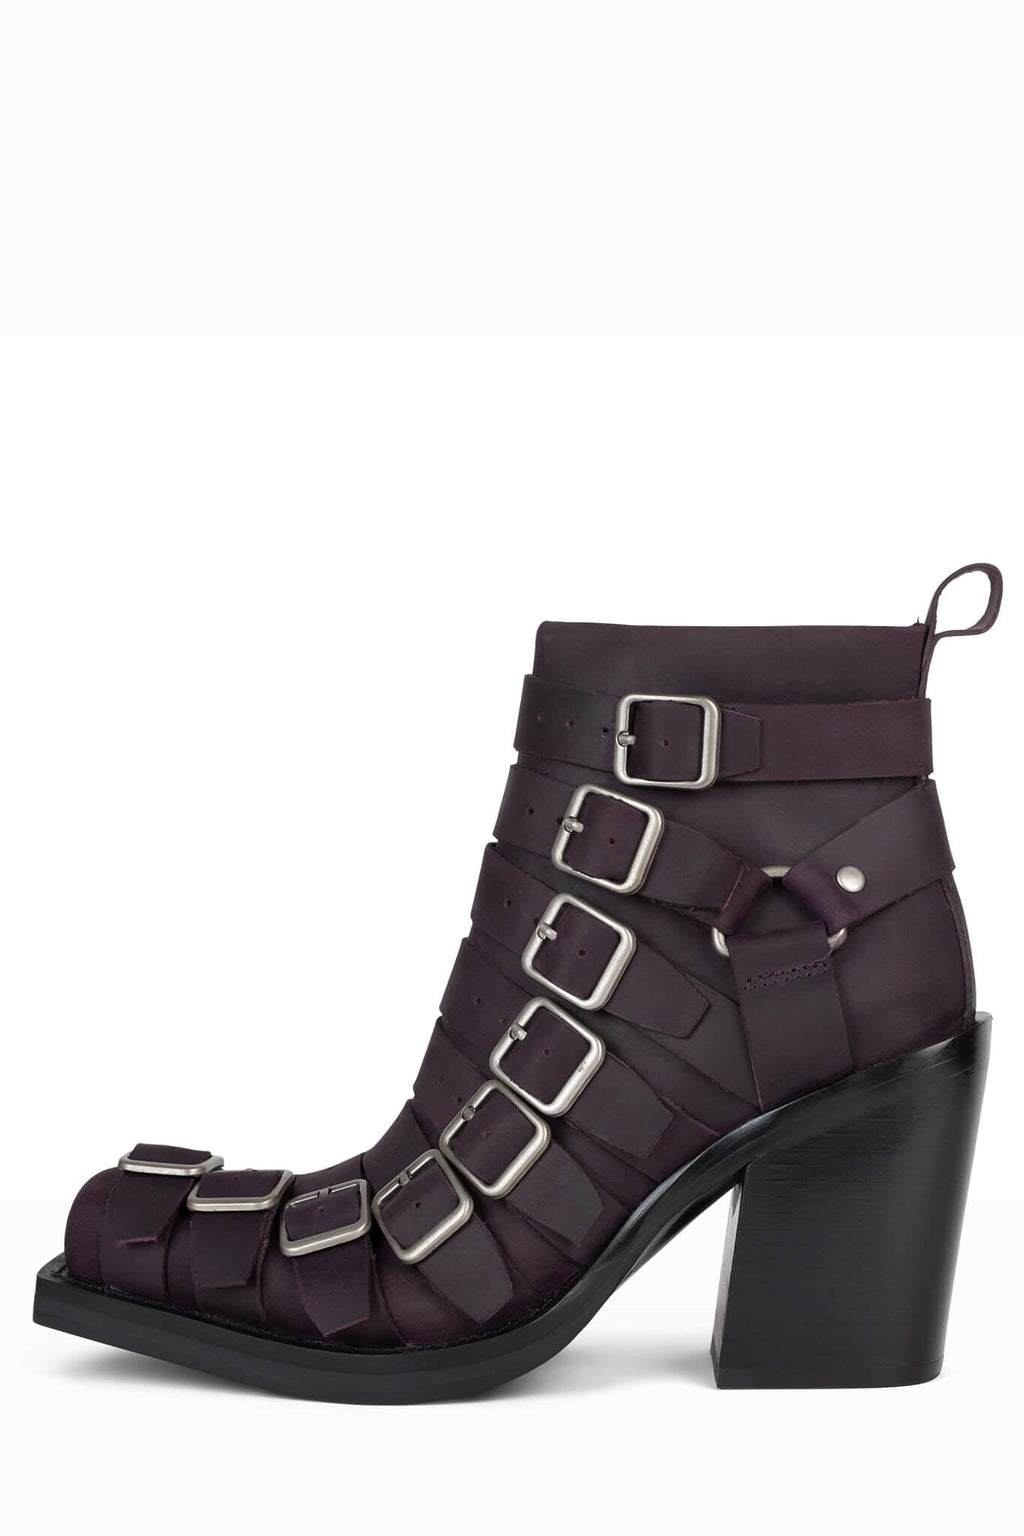 MYSTER-B Ankle boot ST Purple Crazy Horse Silver 6 